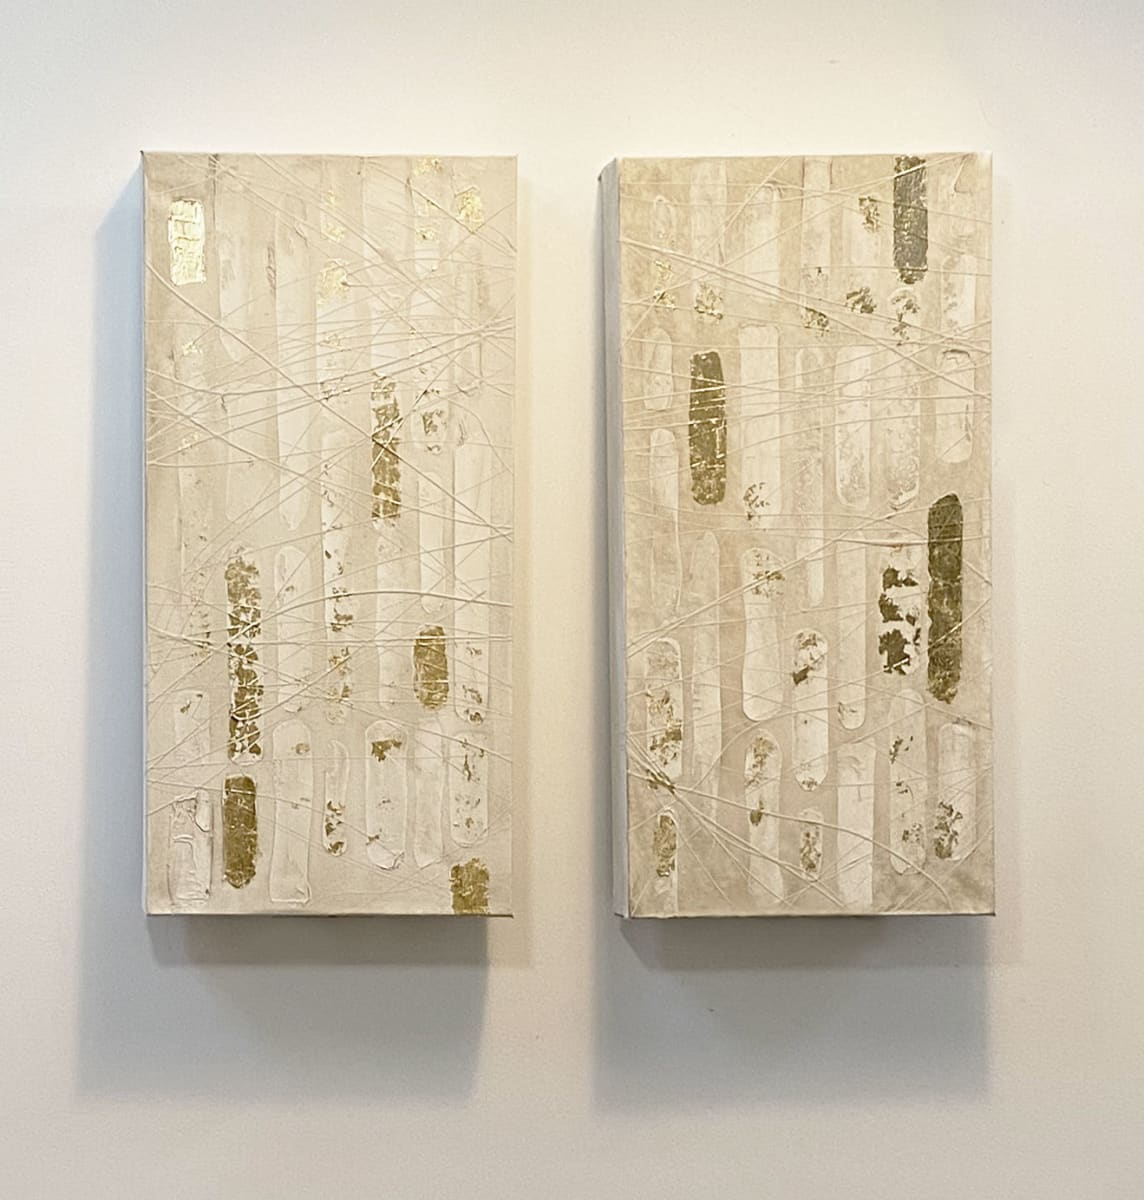 Enchanted diptych 24x12 each by Julie Anna Lewis  Image: Enchanted diptych 24x12 each